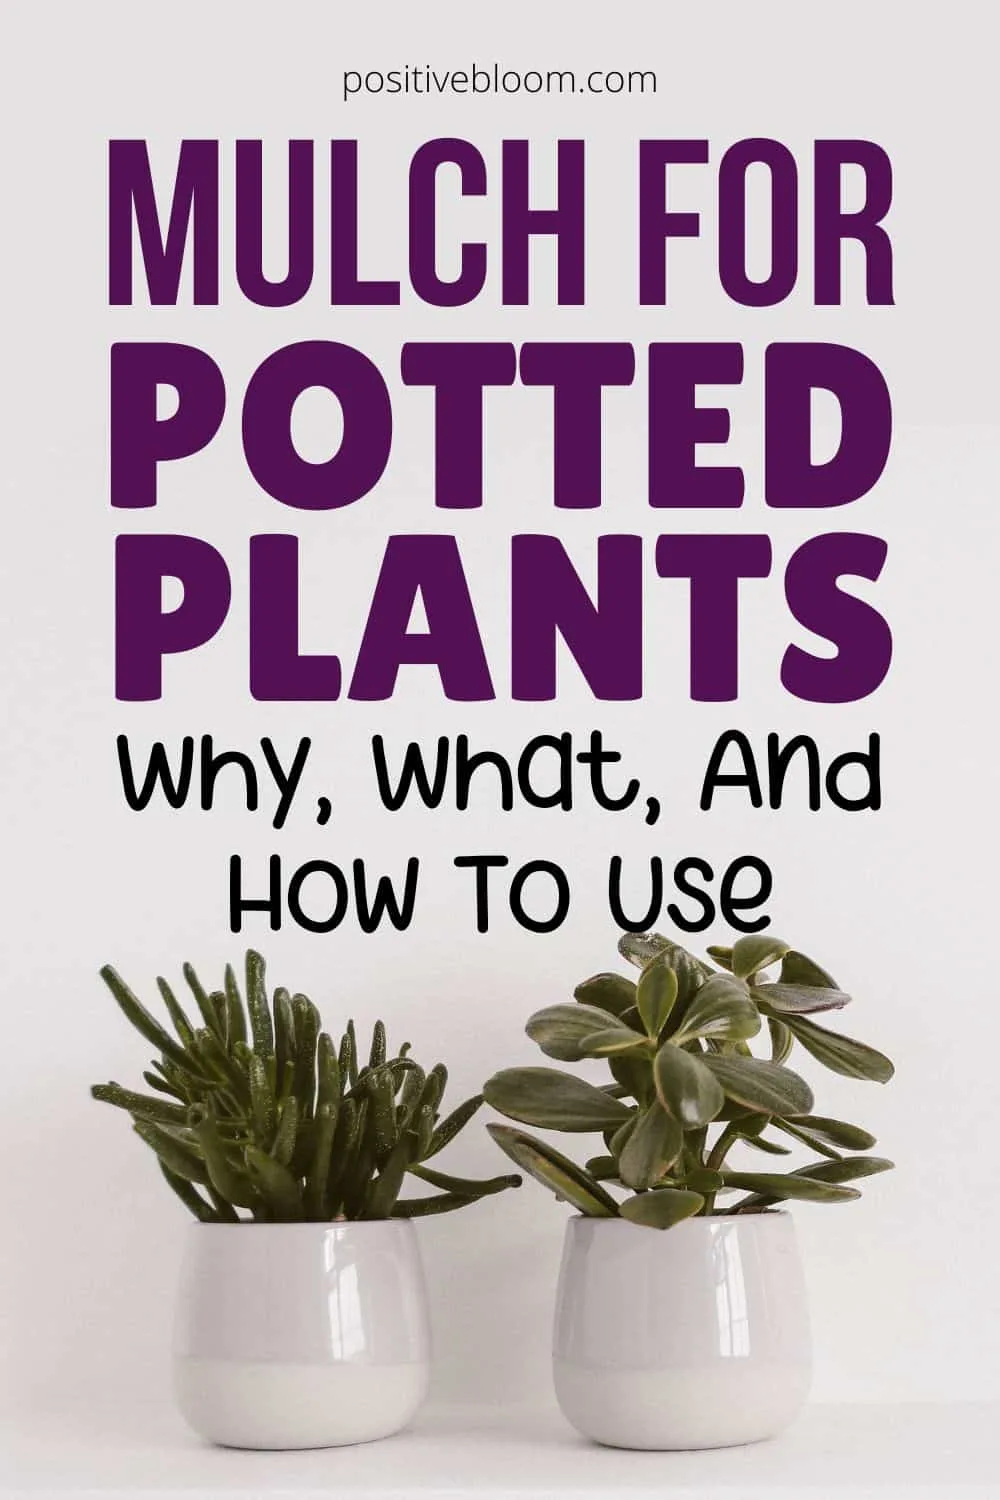 Mulch For Potted Plants Why, What, And How To Use Pinterest